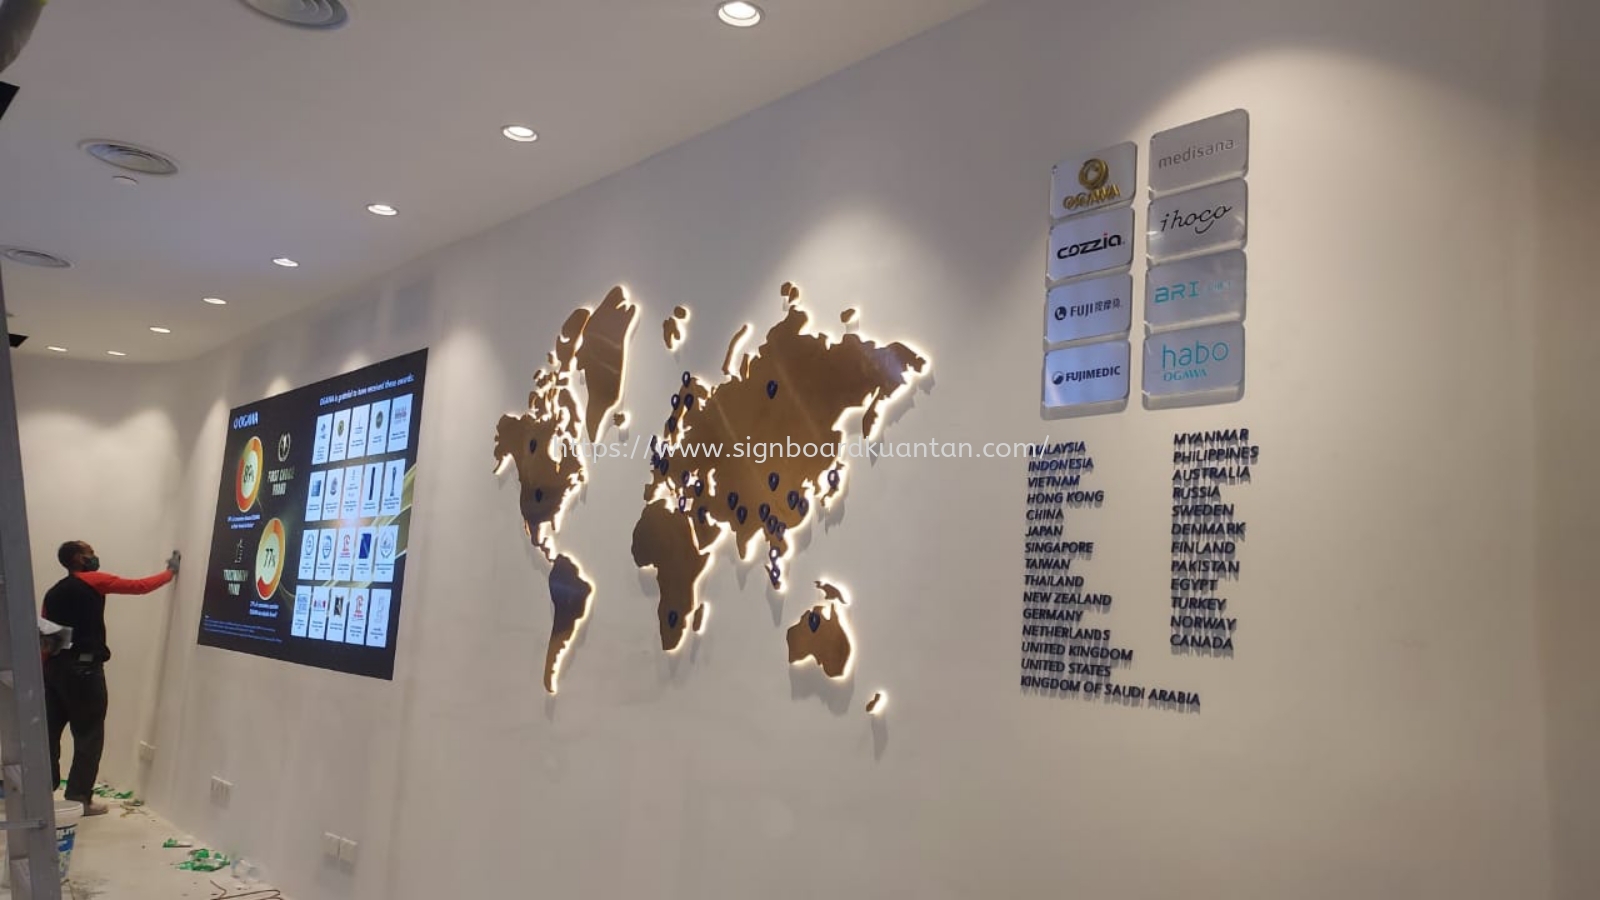 MAP INDOOR 3D STAINLESS STEEL GOLD SIGNAGE SIGNBOARD AT PAHANG TEMERLOH 